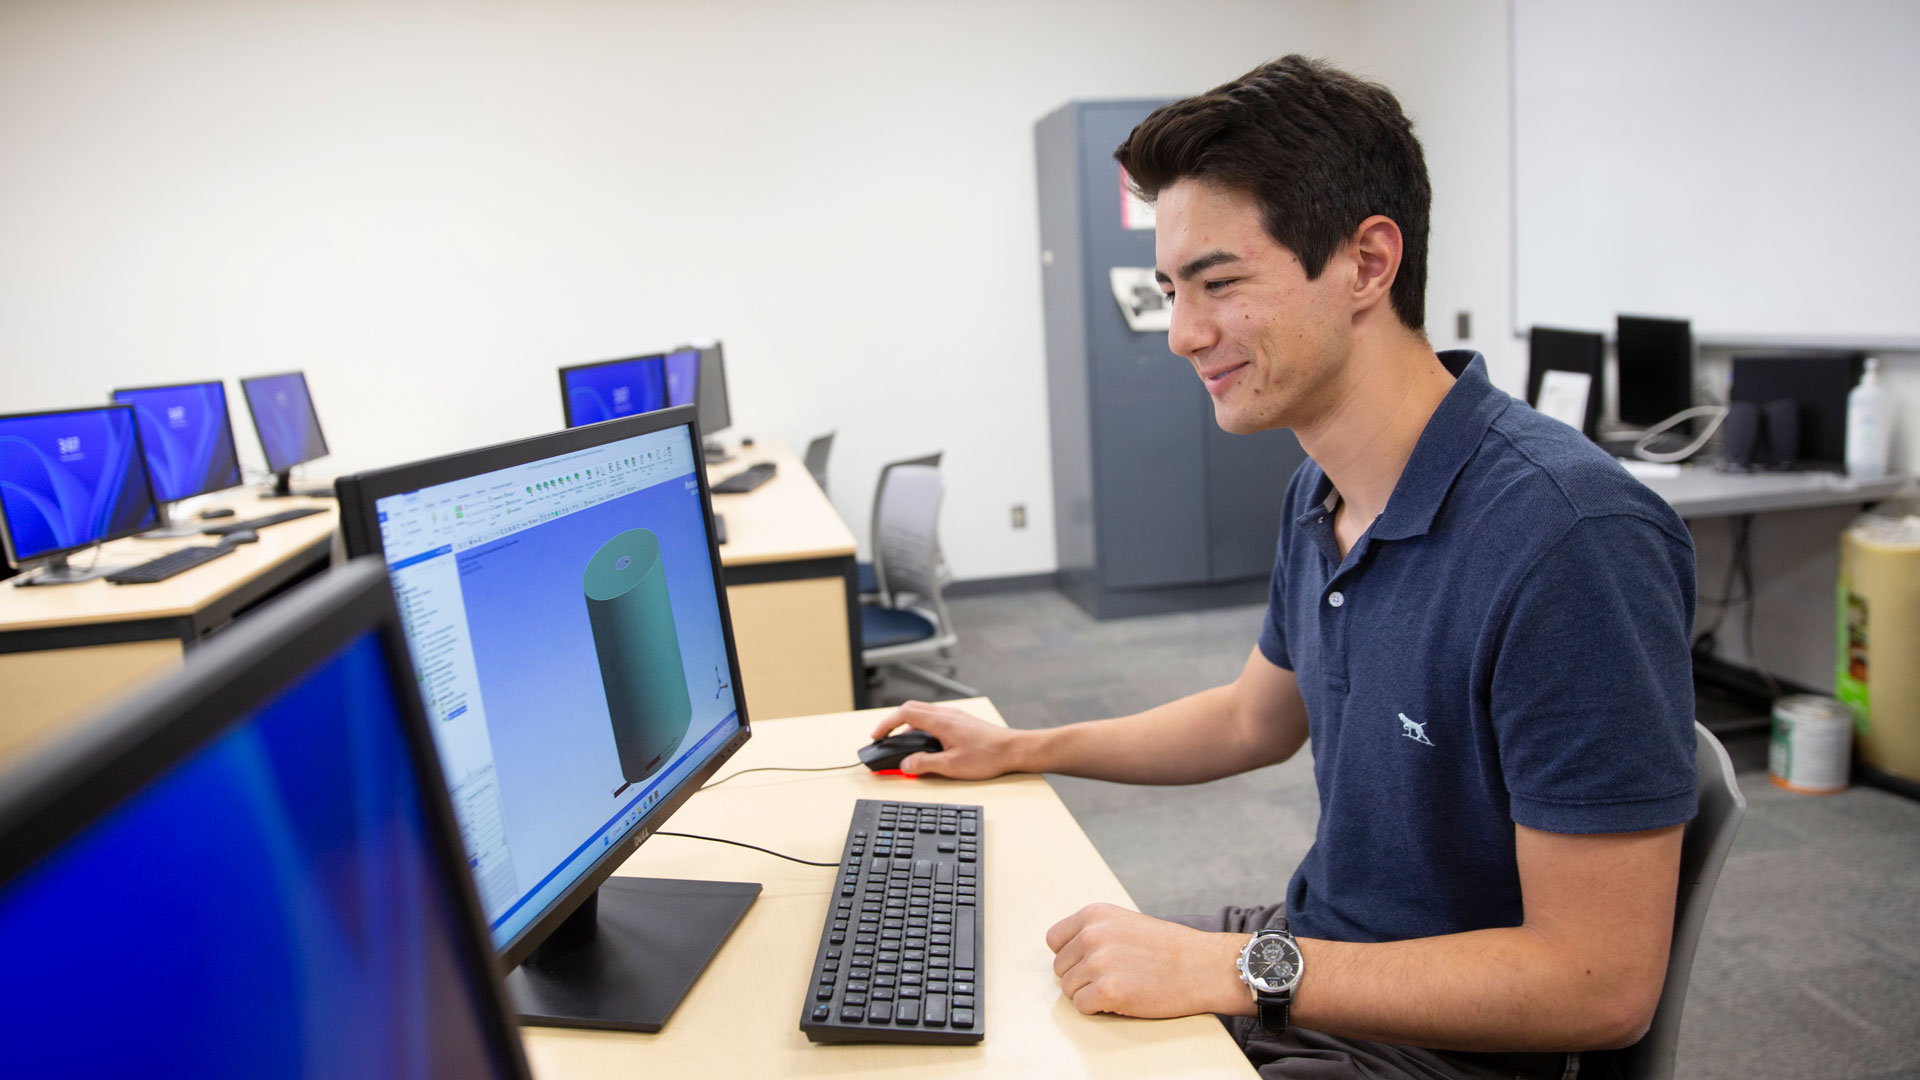 Mechanical engineering major Tyler Norkus works on a FURI project to advance semiconductor knowledge by simulating what happens to different materials during the manufacturing of semiconductor devices at very small scales.